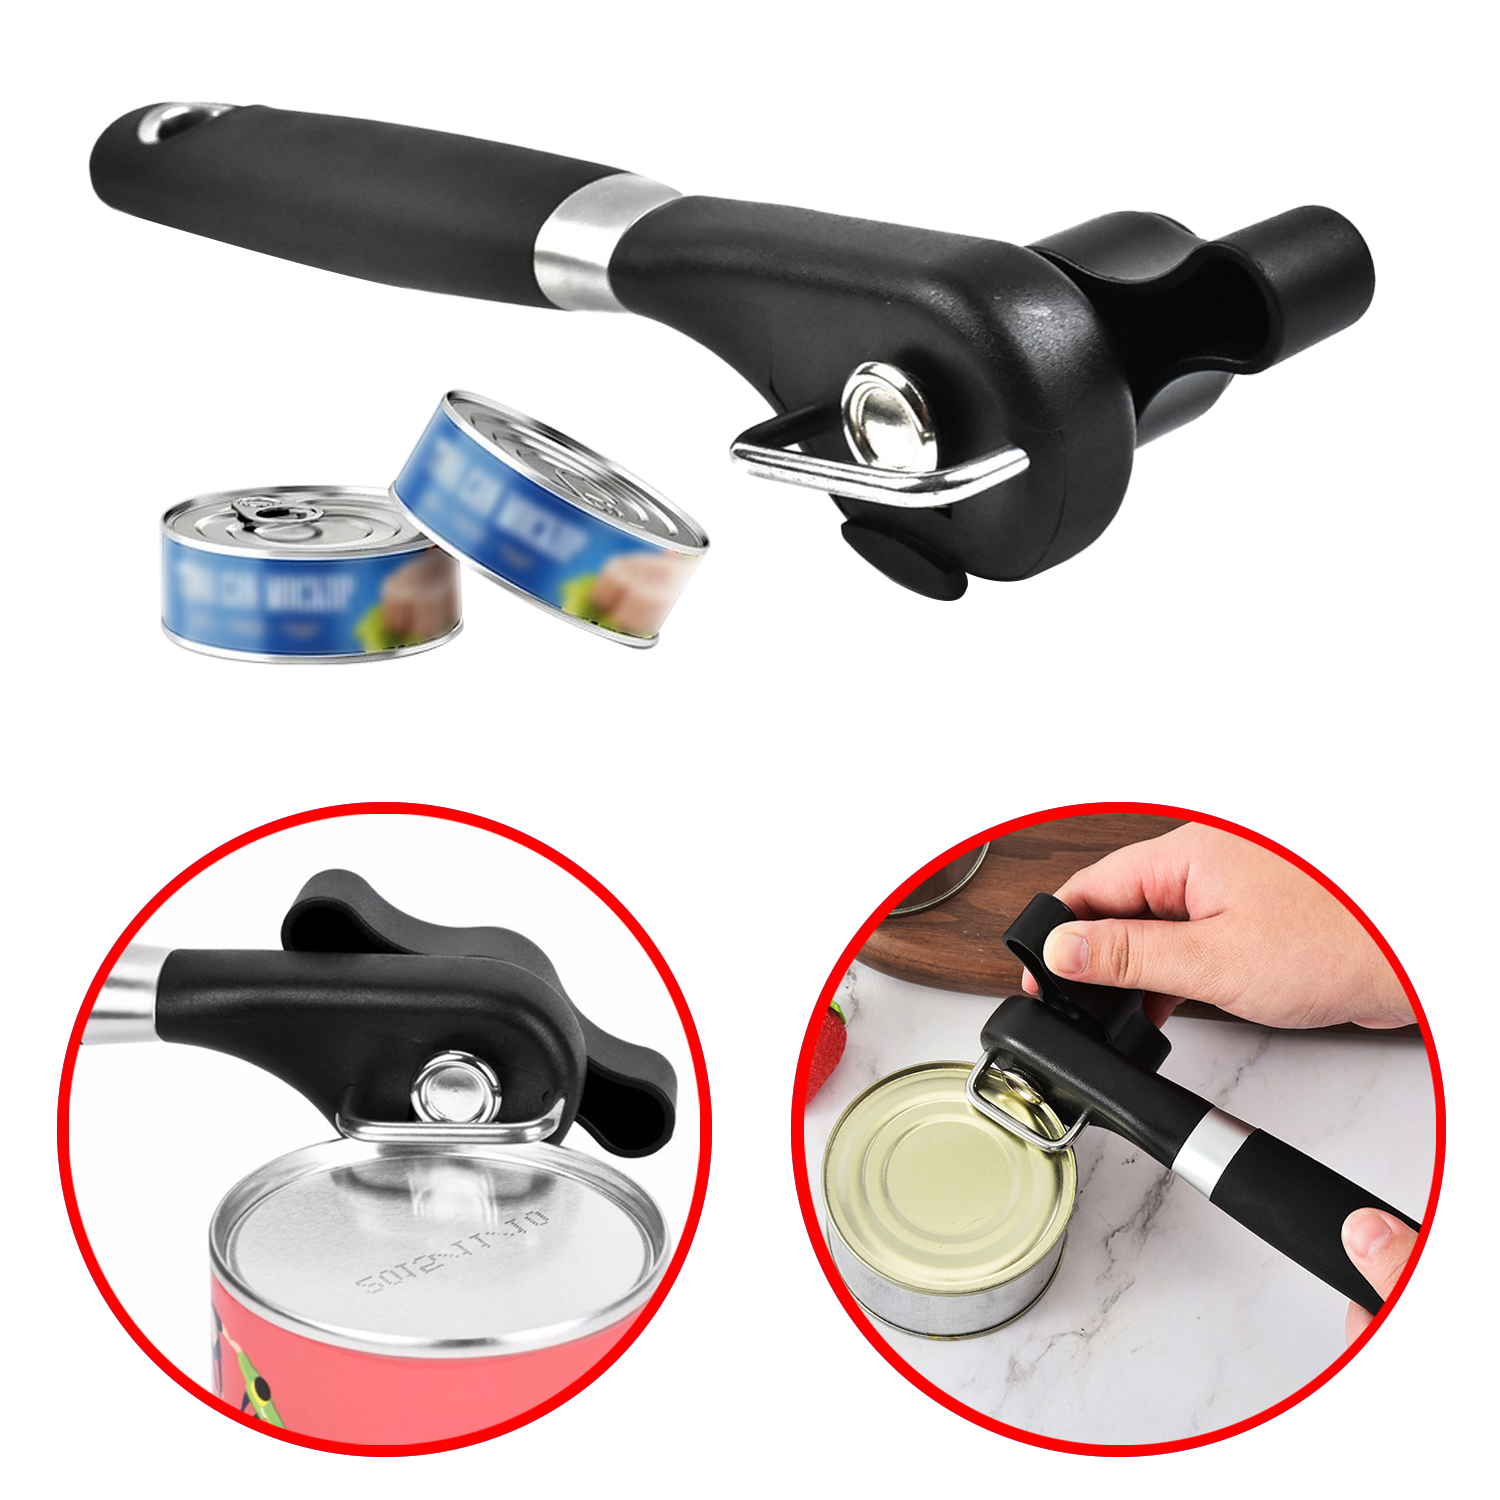 Can Opener Smooth Edge Safe Cut Can Opener Handheld with Ergonomics Design No Sharp Edges Can Bottle Opener Kitchen Safety Manual Can Opener